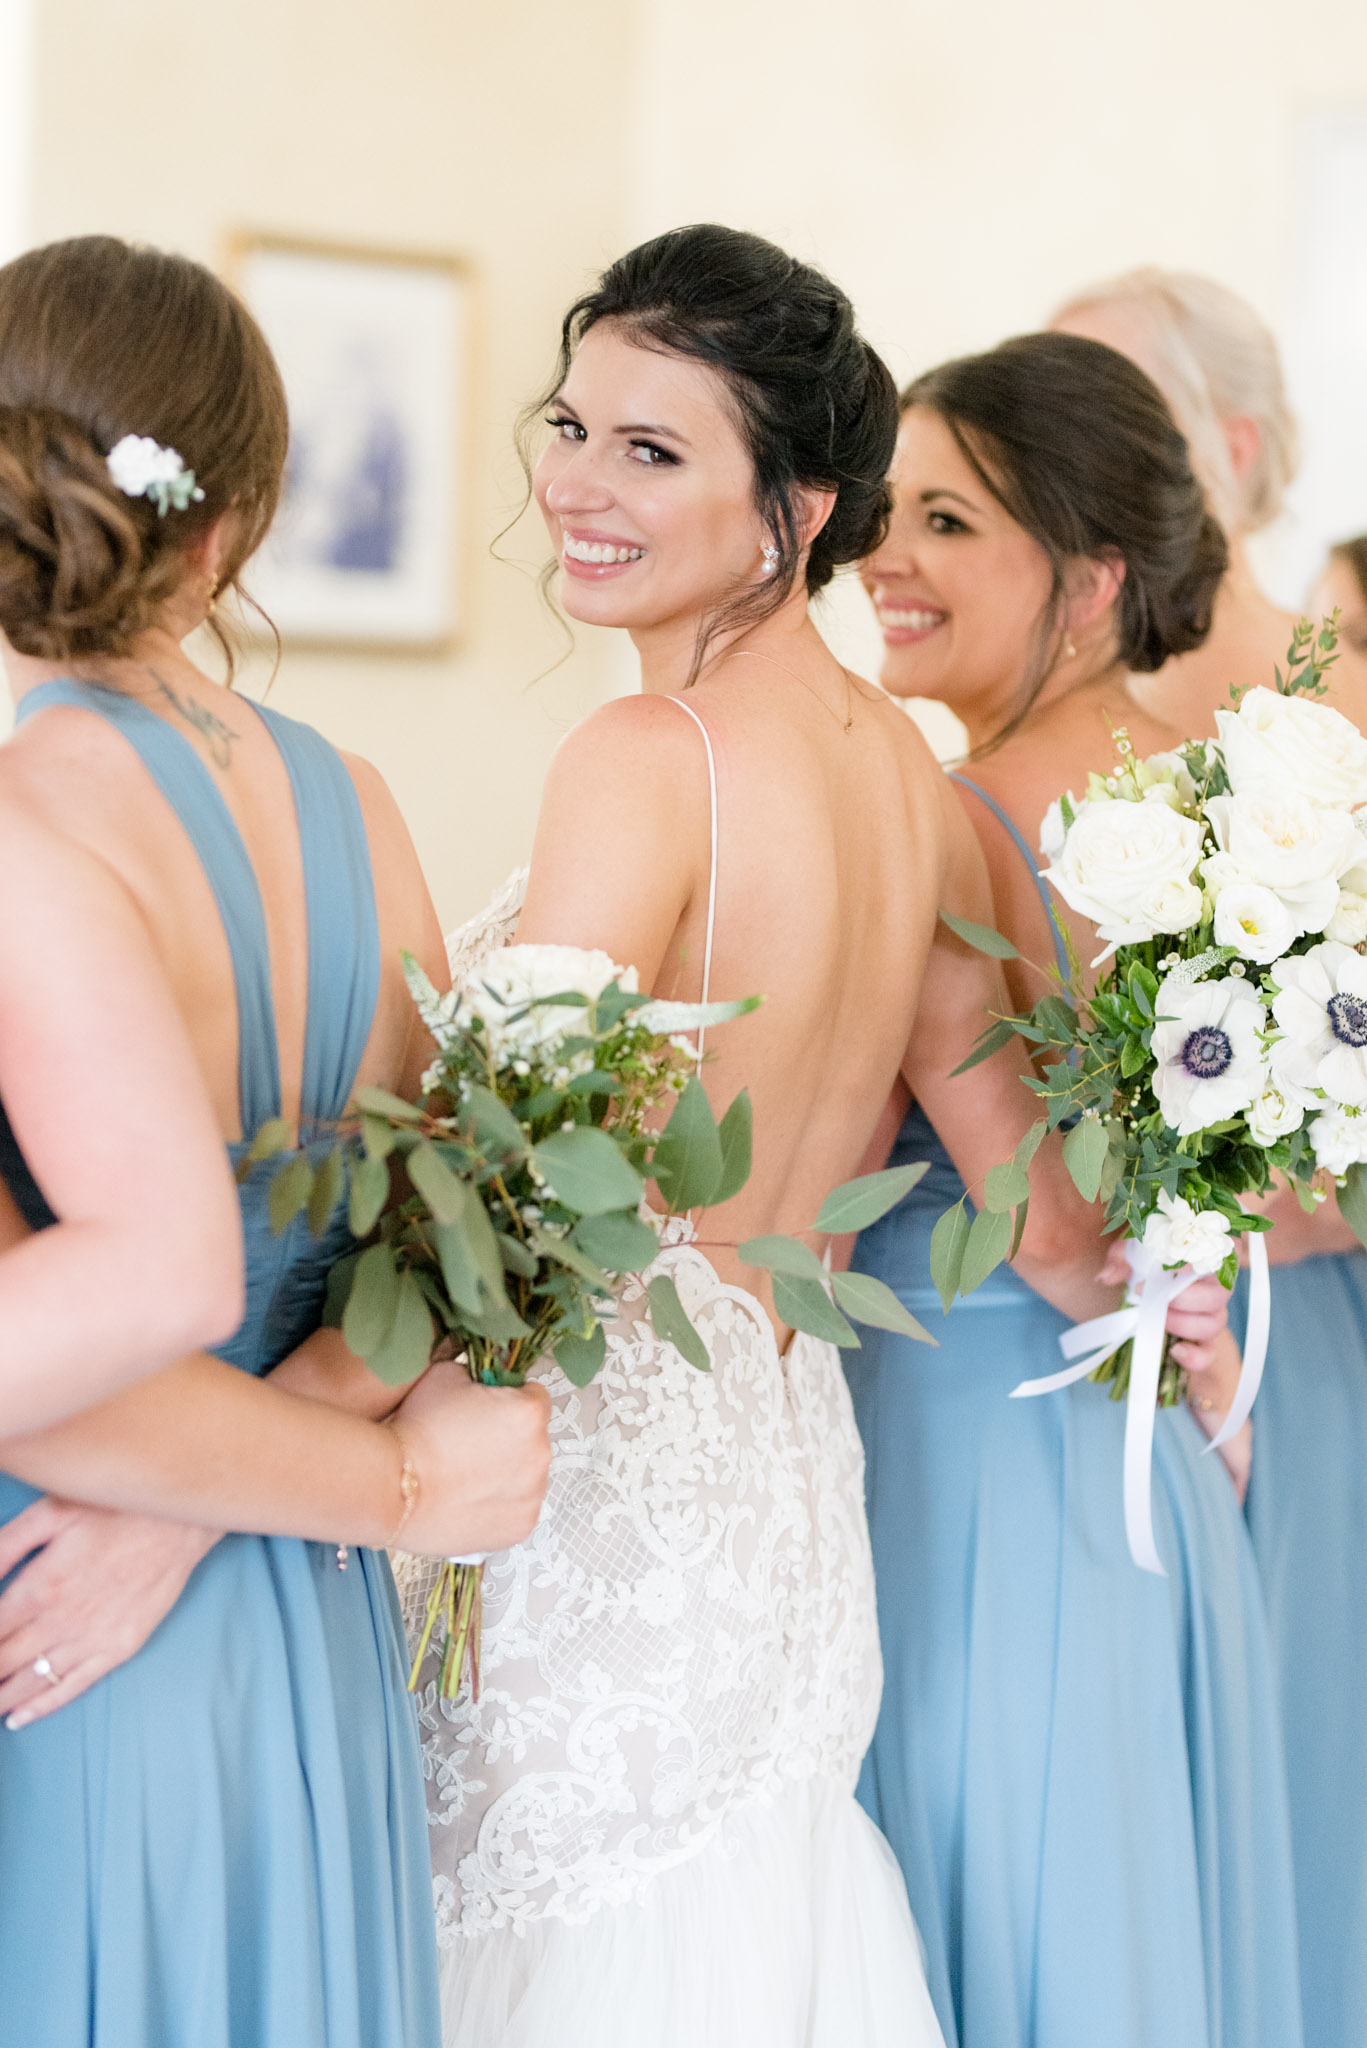 Bride looks over shoulder and smiles.